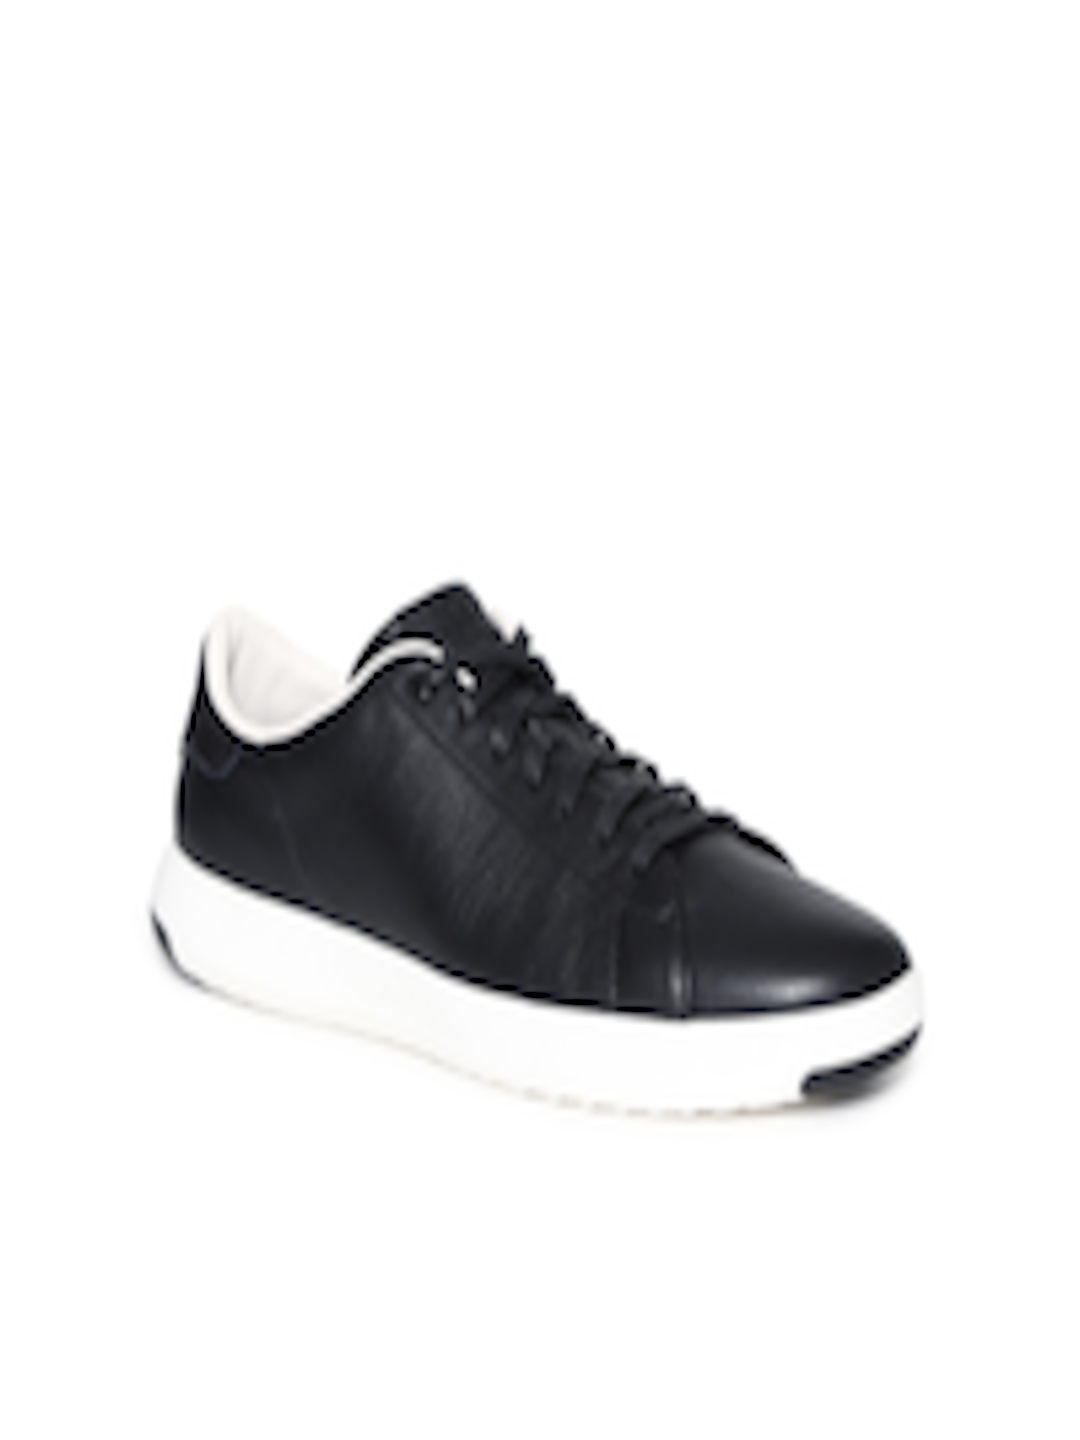 Buy Cole Haan Women Black Leather Sneakers - Casual Shoes for Women ...